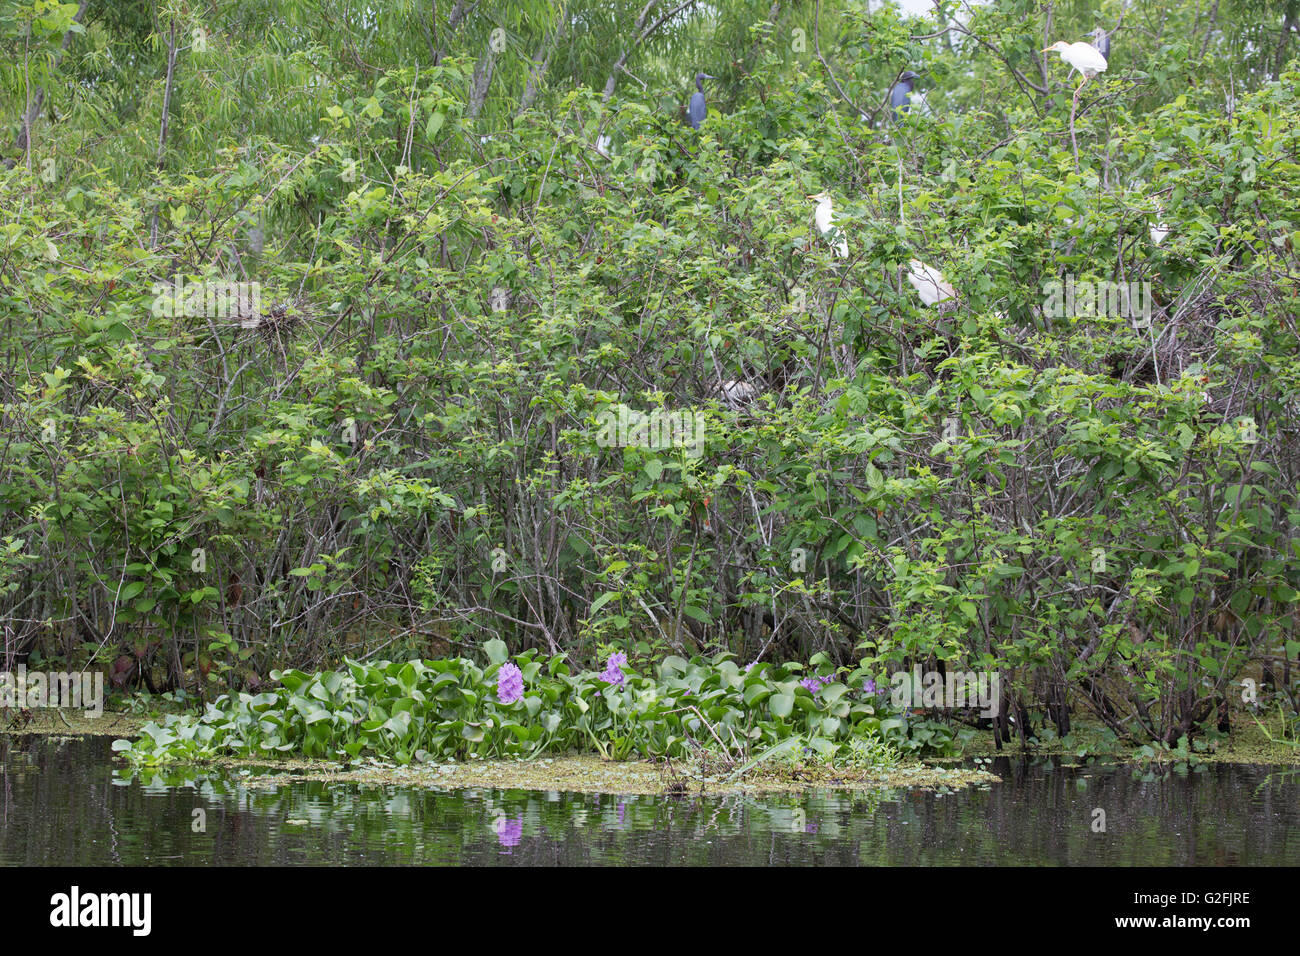 Patch of water hyacinth (Eichhornia crassipes} in manmade Miller's Lake beside bird nesting rookery Stock Photo